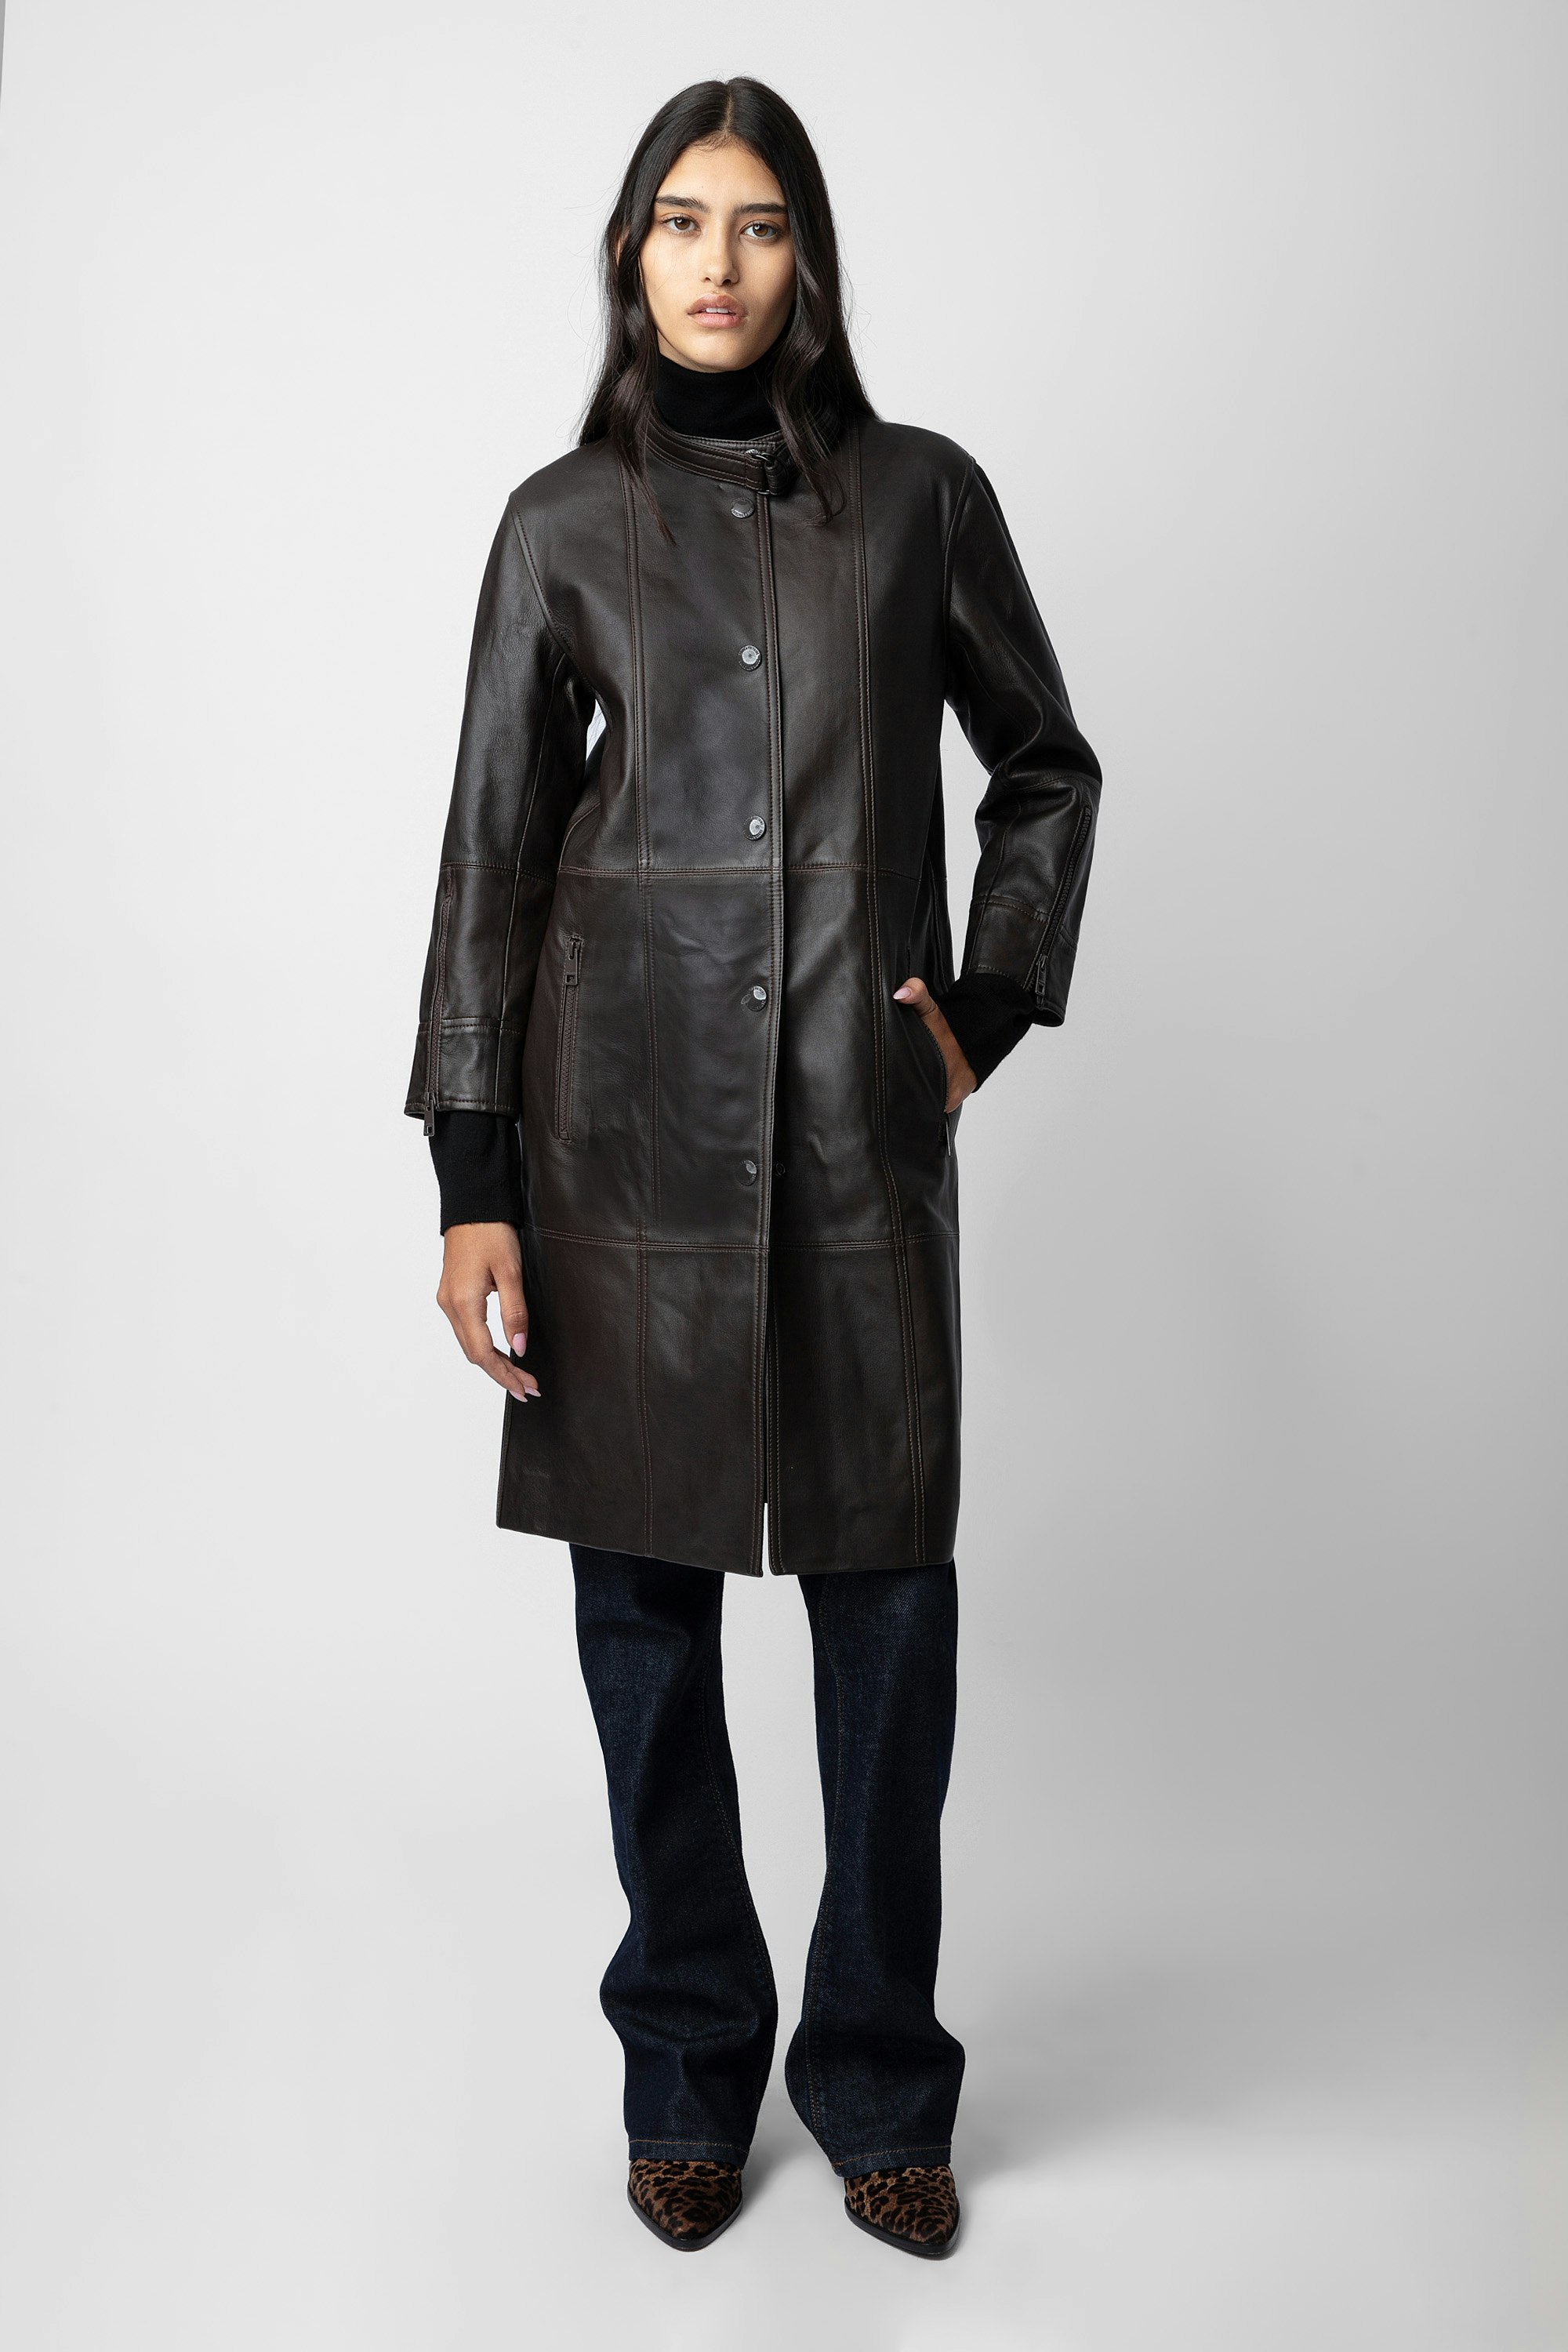 Mira Leather Coat - Women’s brown leather midi coat with strap.